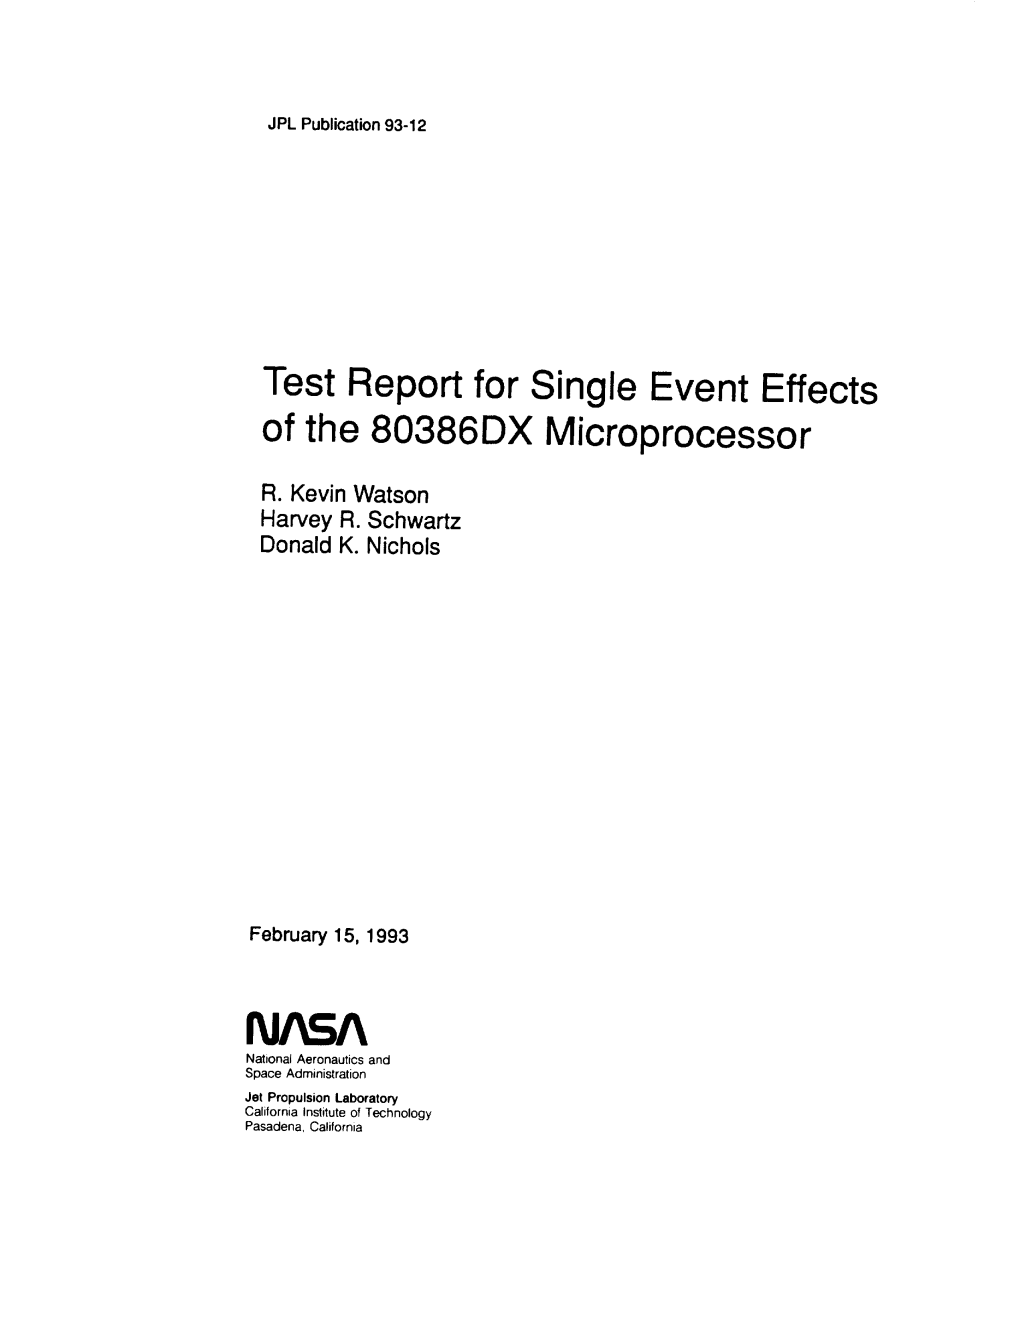 Test Report for Single Event Effects of the 80386DX M=Croprocessor